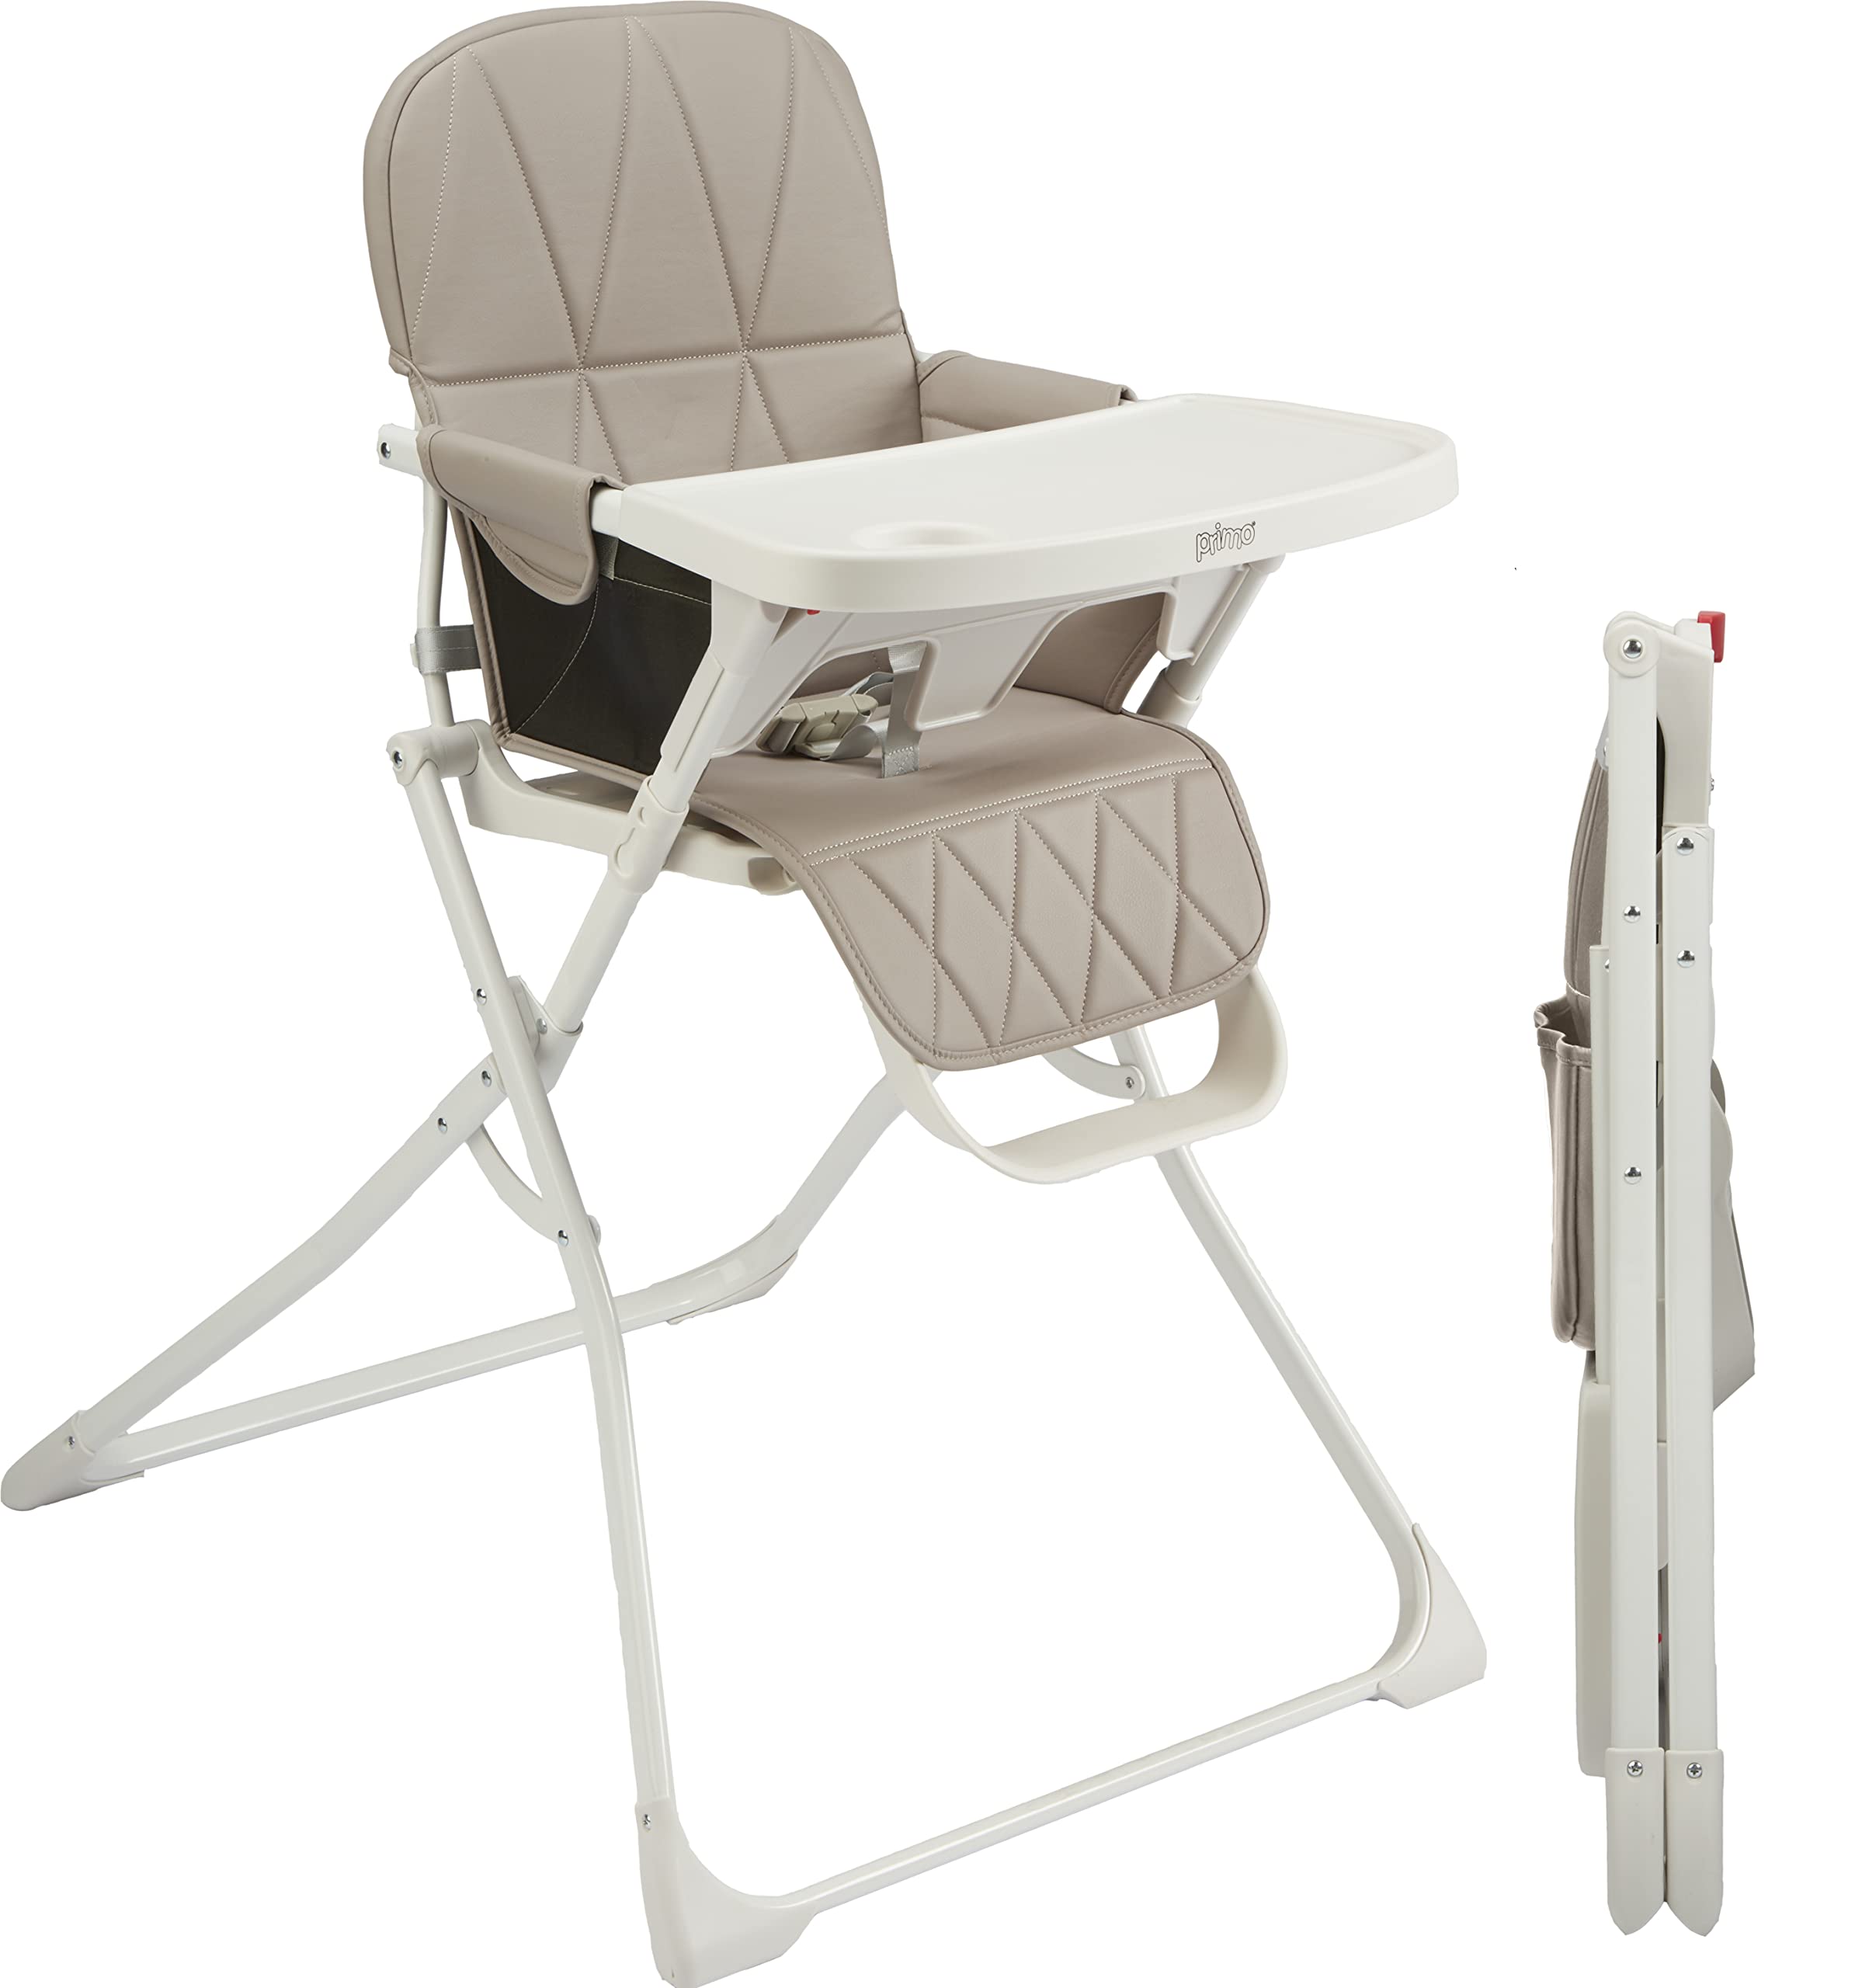 Primo PopUp Folding High Chair